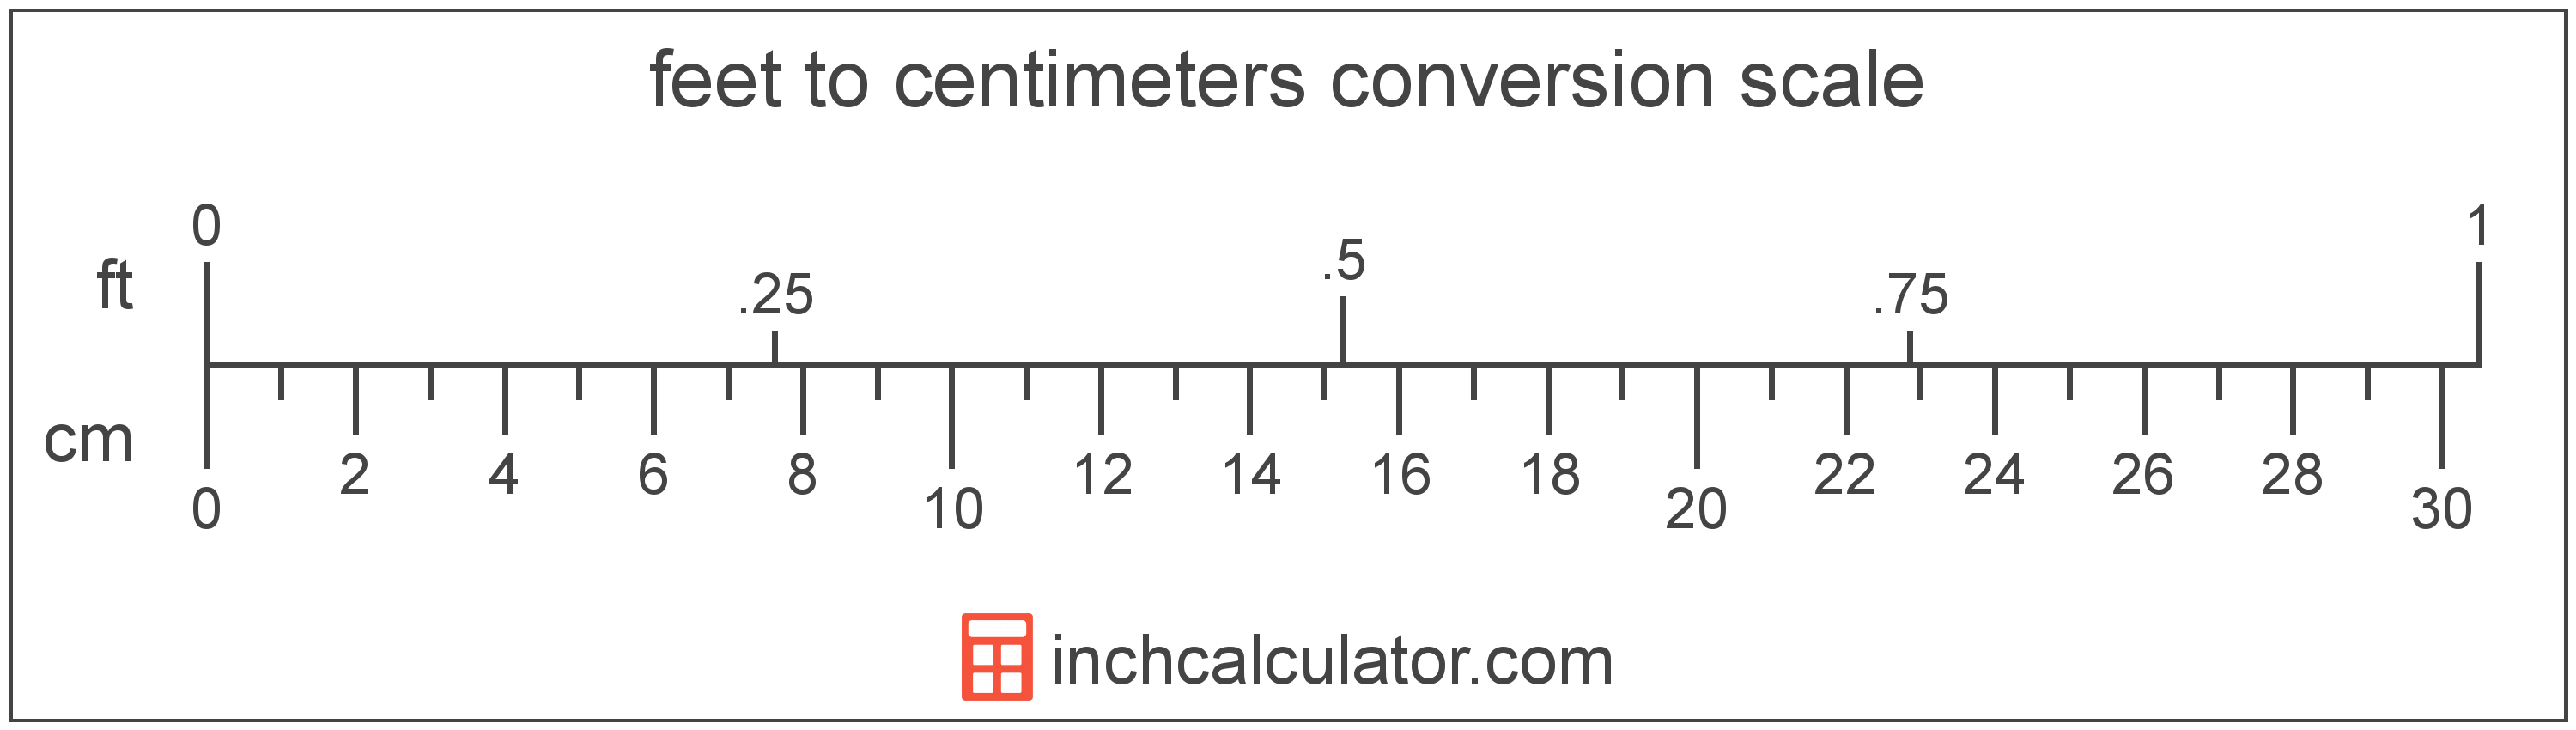 Centimeters To Feet Conversion Chart Printable